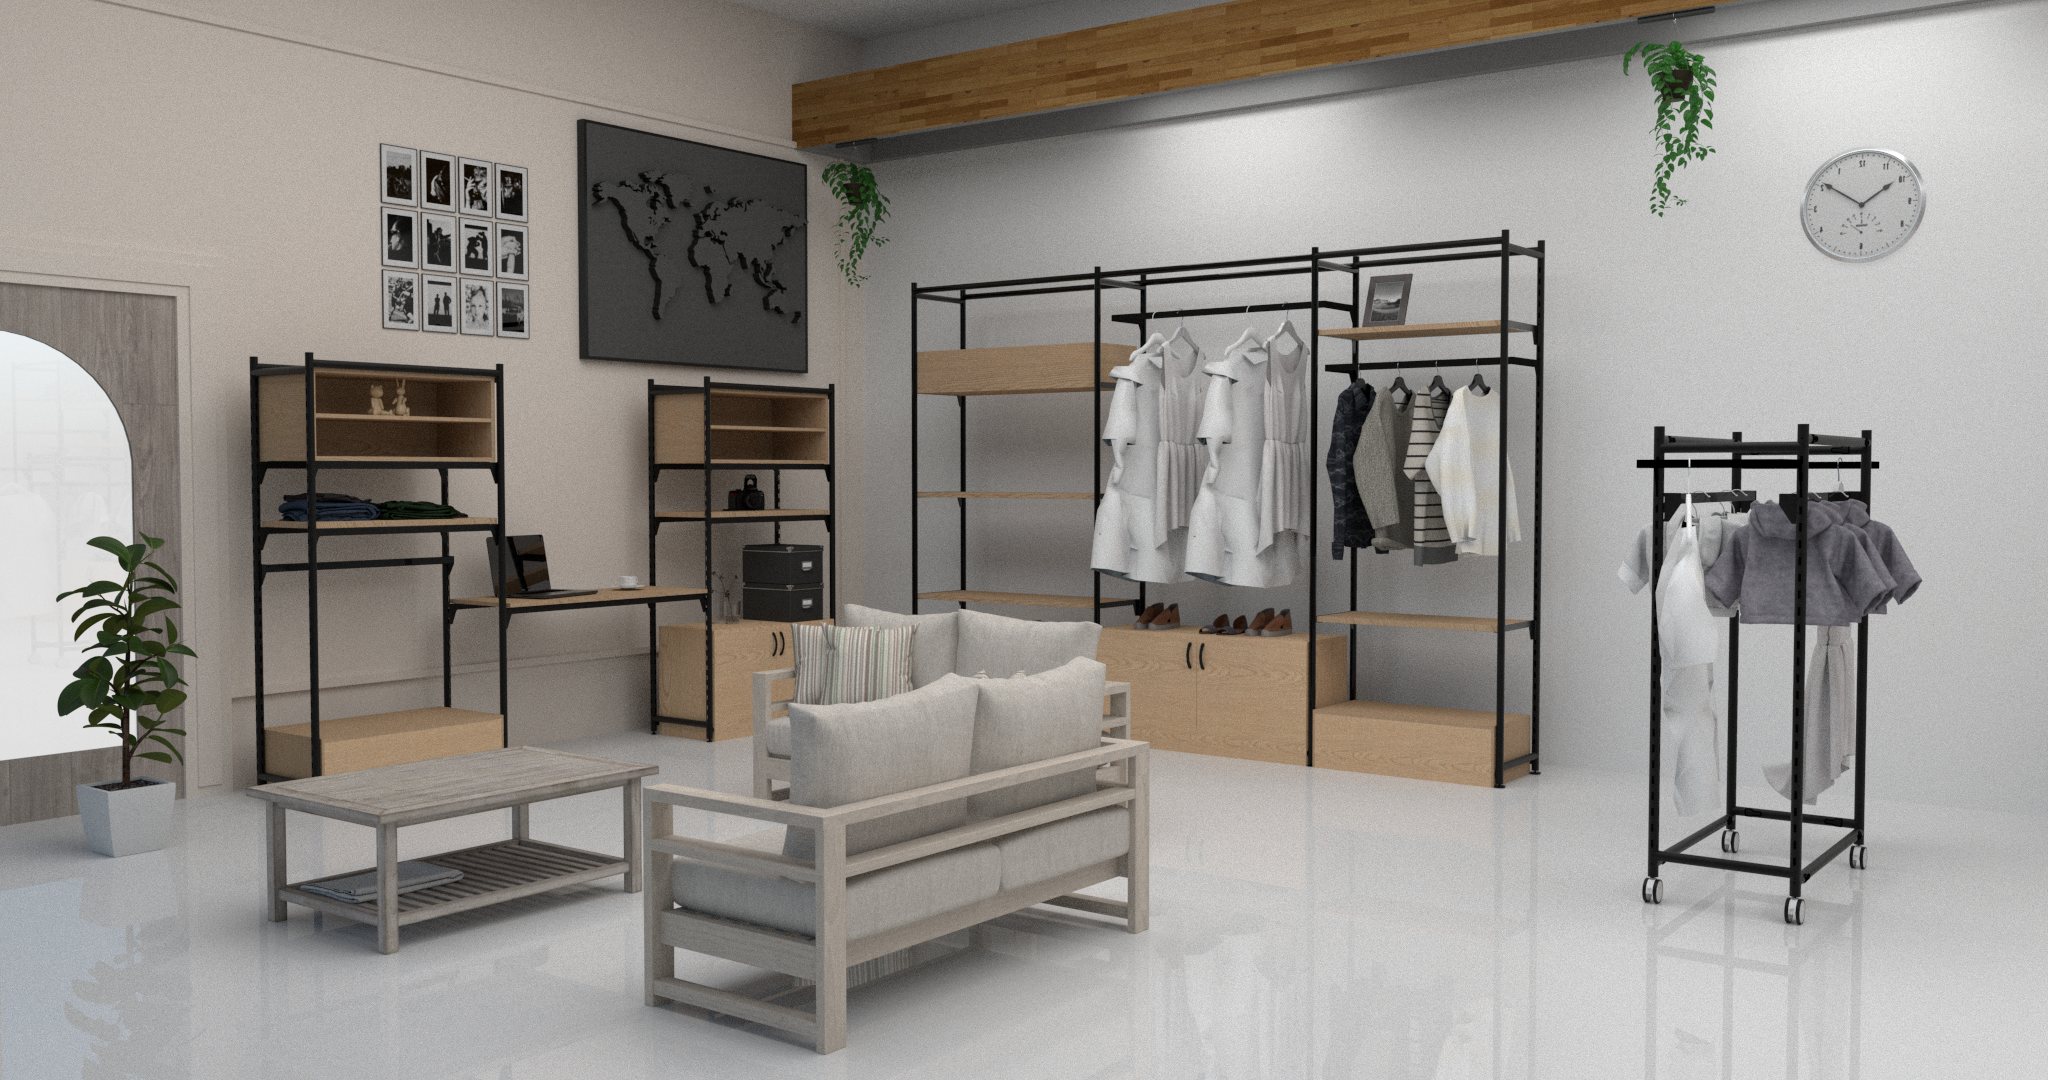 Room divider shelving system in retail